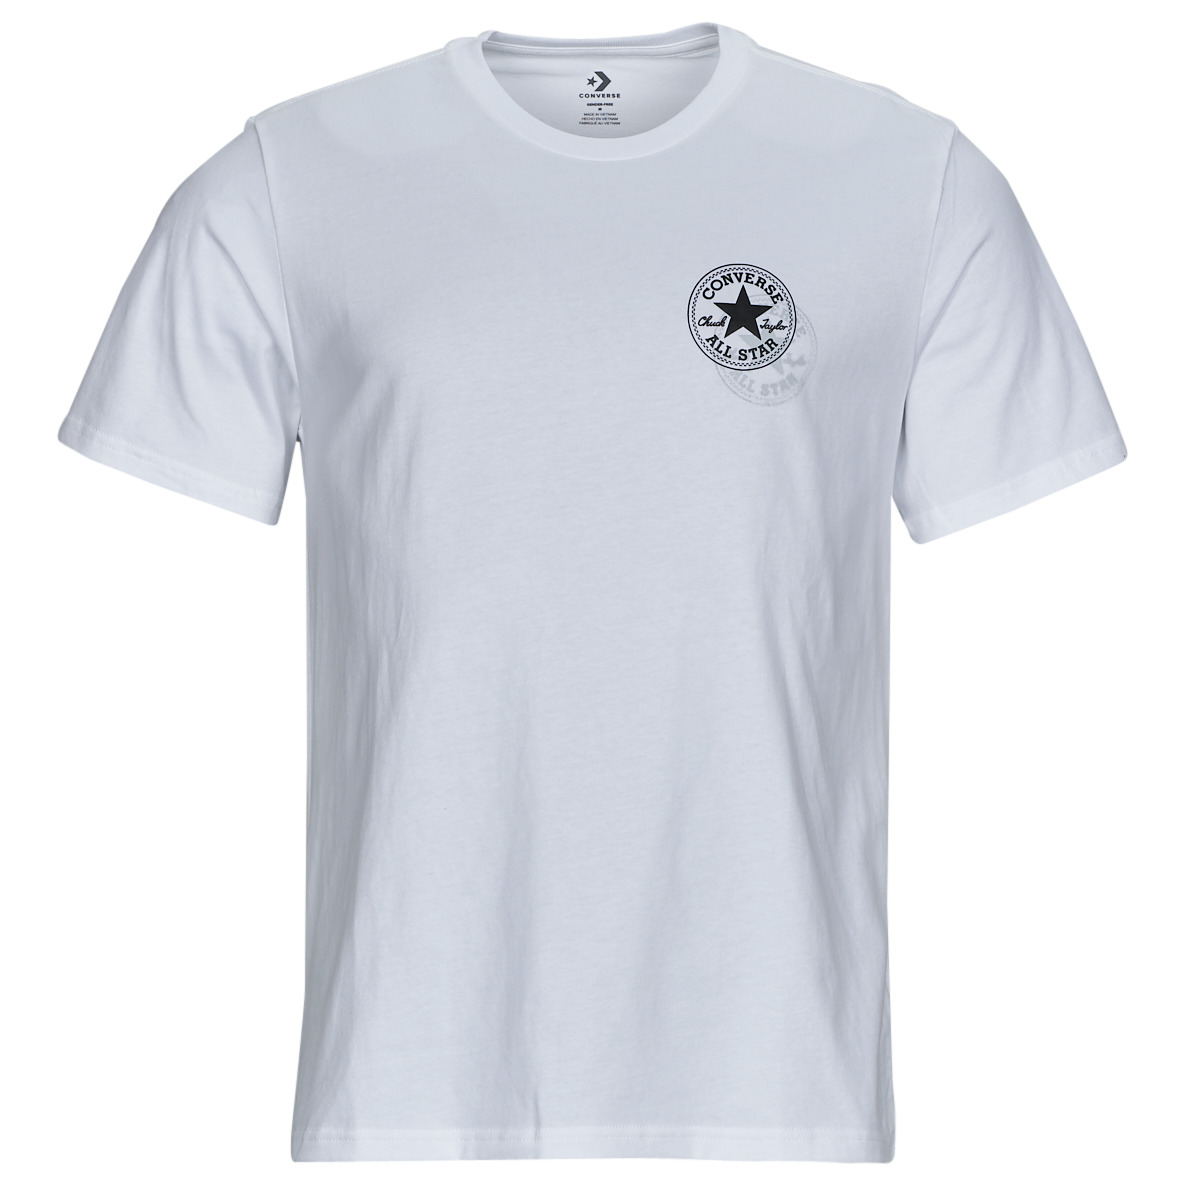 STAR delivery t-shirts - ALL ! Clothing € - Converse Spartoo short-sleeved | Europe 26,40 GO-TO Fast White Men PATCH